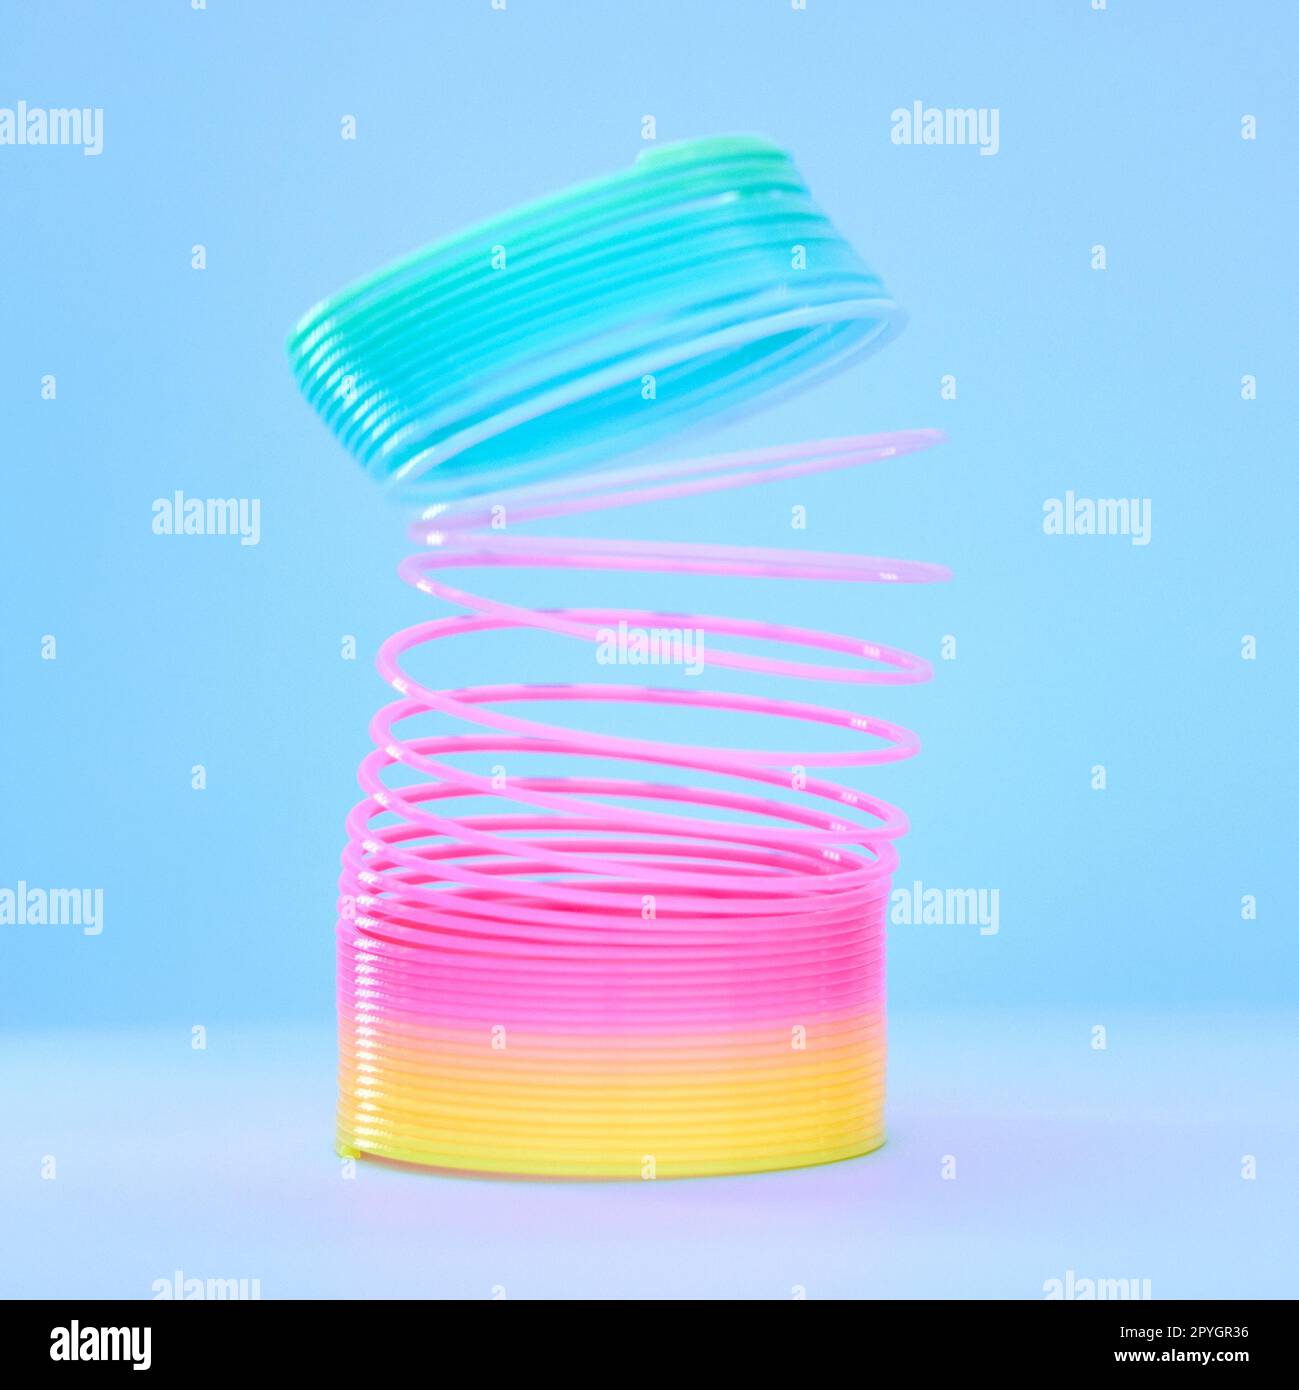 Rainbow slinky toy, spring and plastic product in studio isolated against a blue background mockup. Flexible toys, colorful spirals and childhood item stretched out for playing, having fun and games. Stock Photo